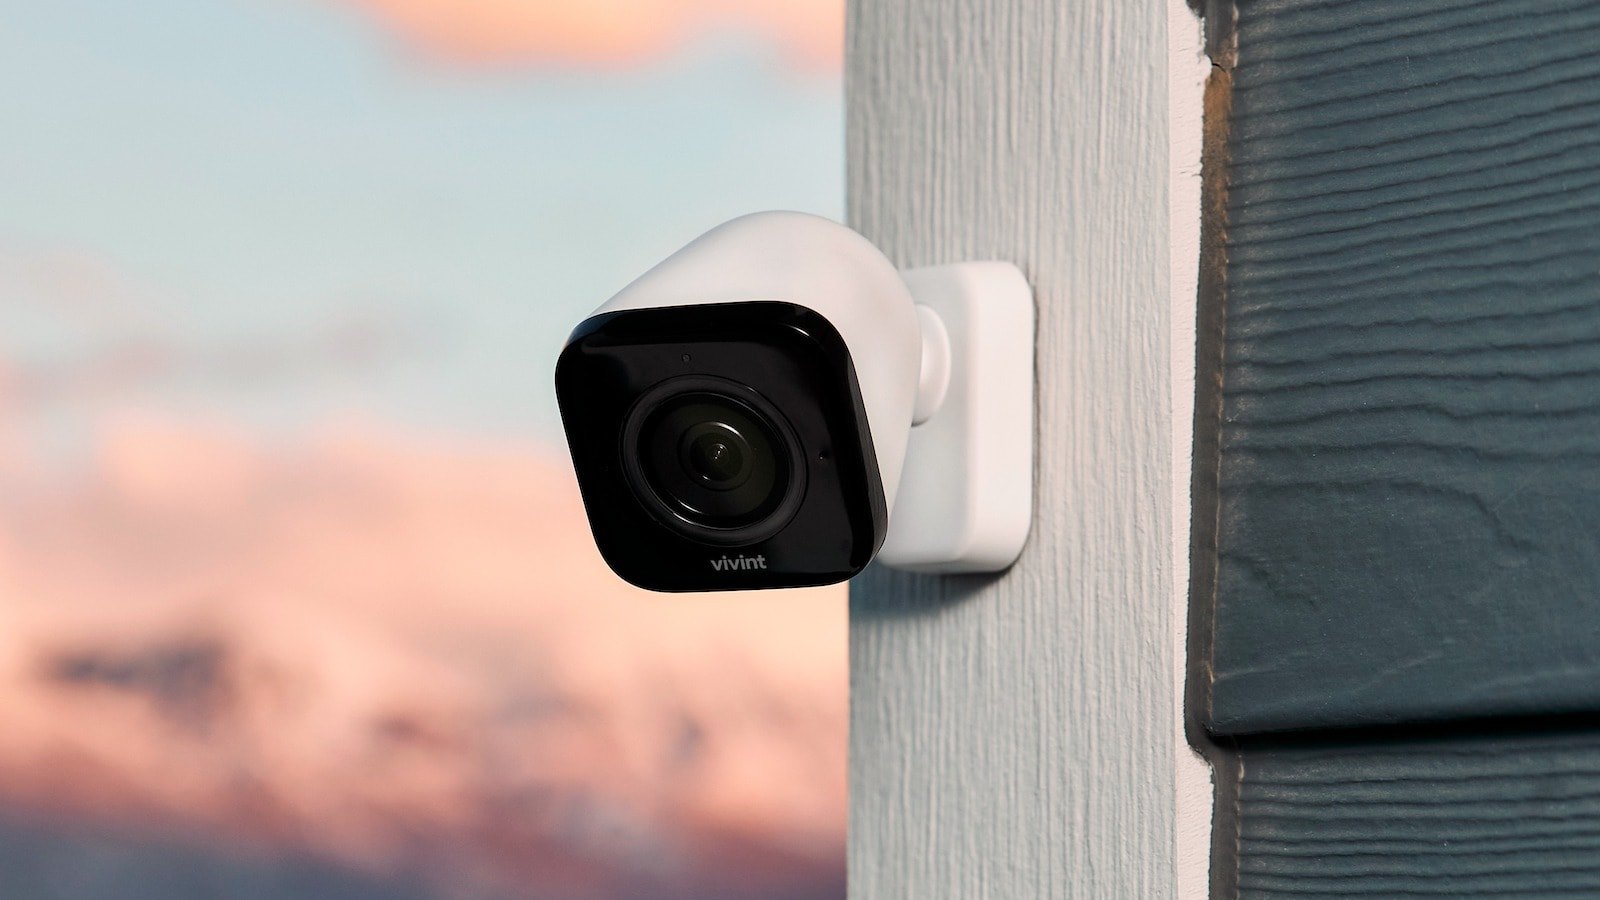 Vivint Camera Collection has the Outdoor Camera Pro, Doorbell Camera Pro & Indoor Camera